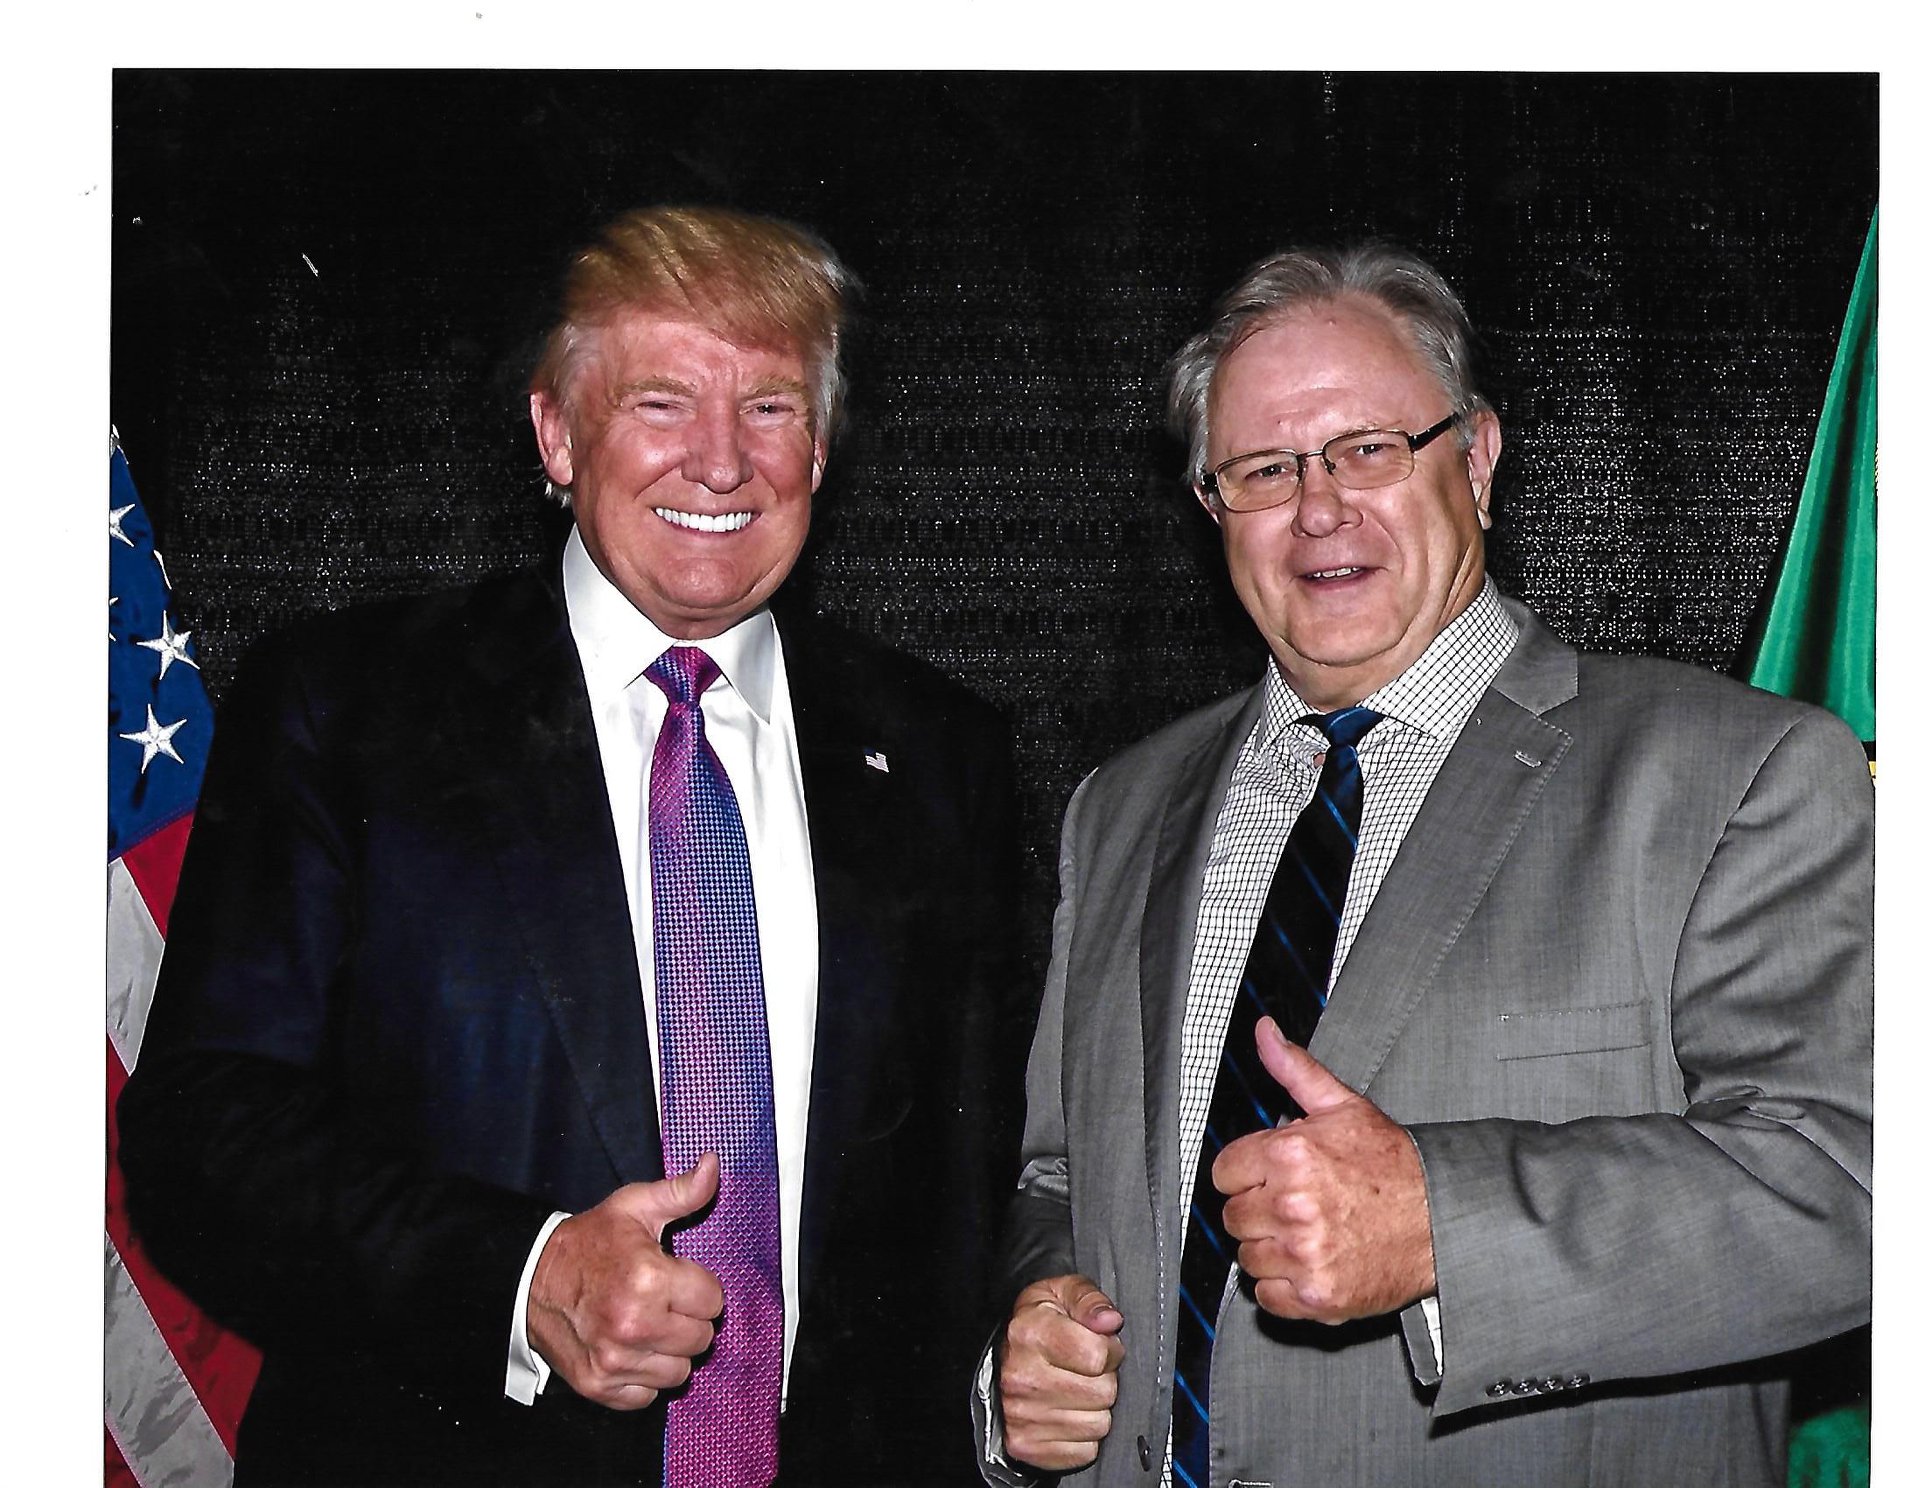 ADA County Commissioner posing with former President Donald Trump